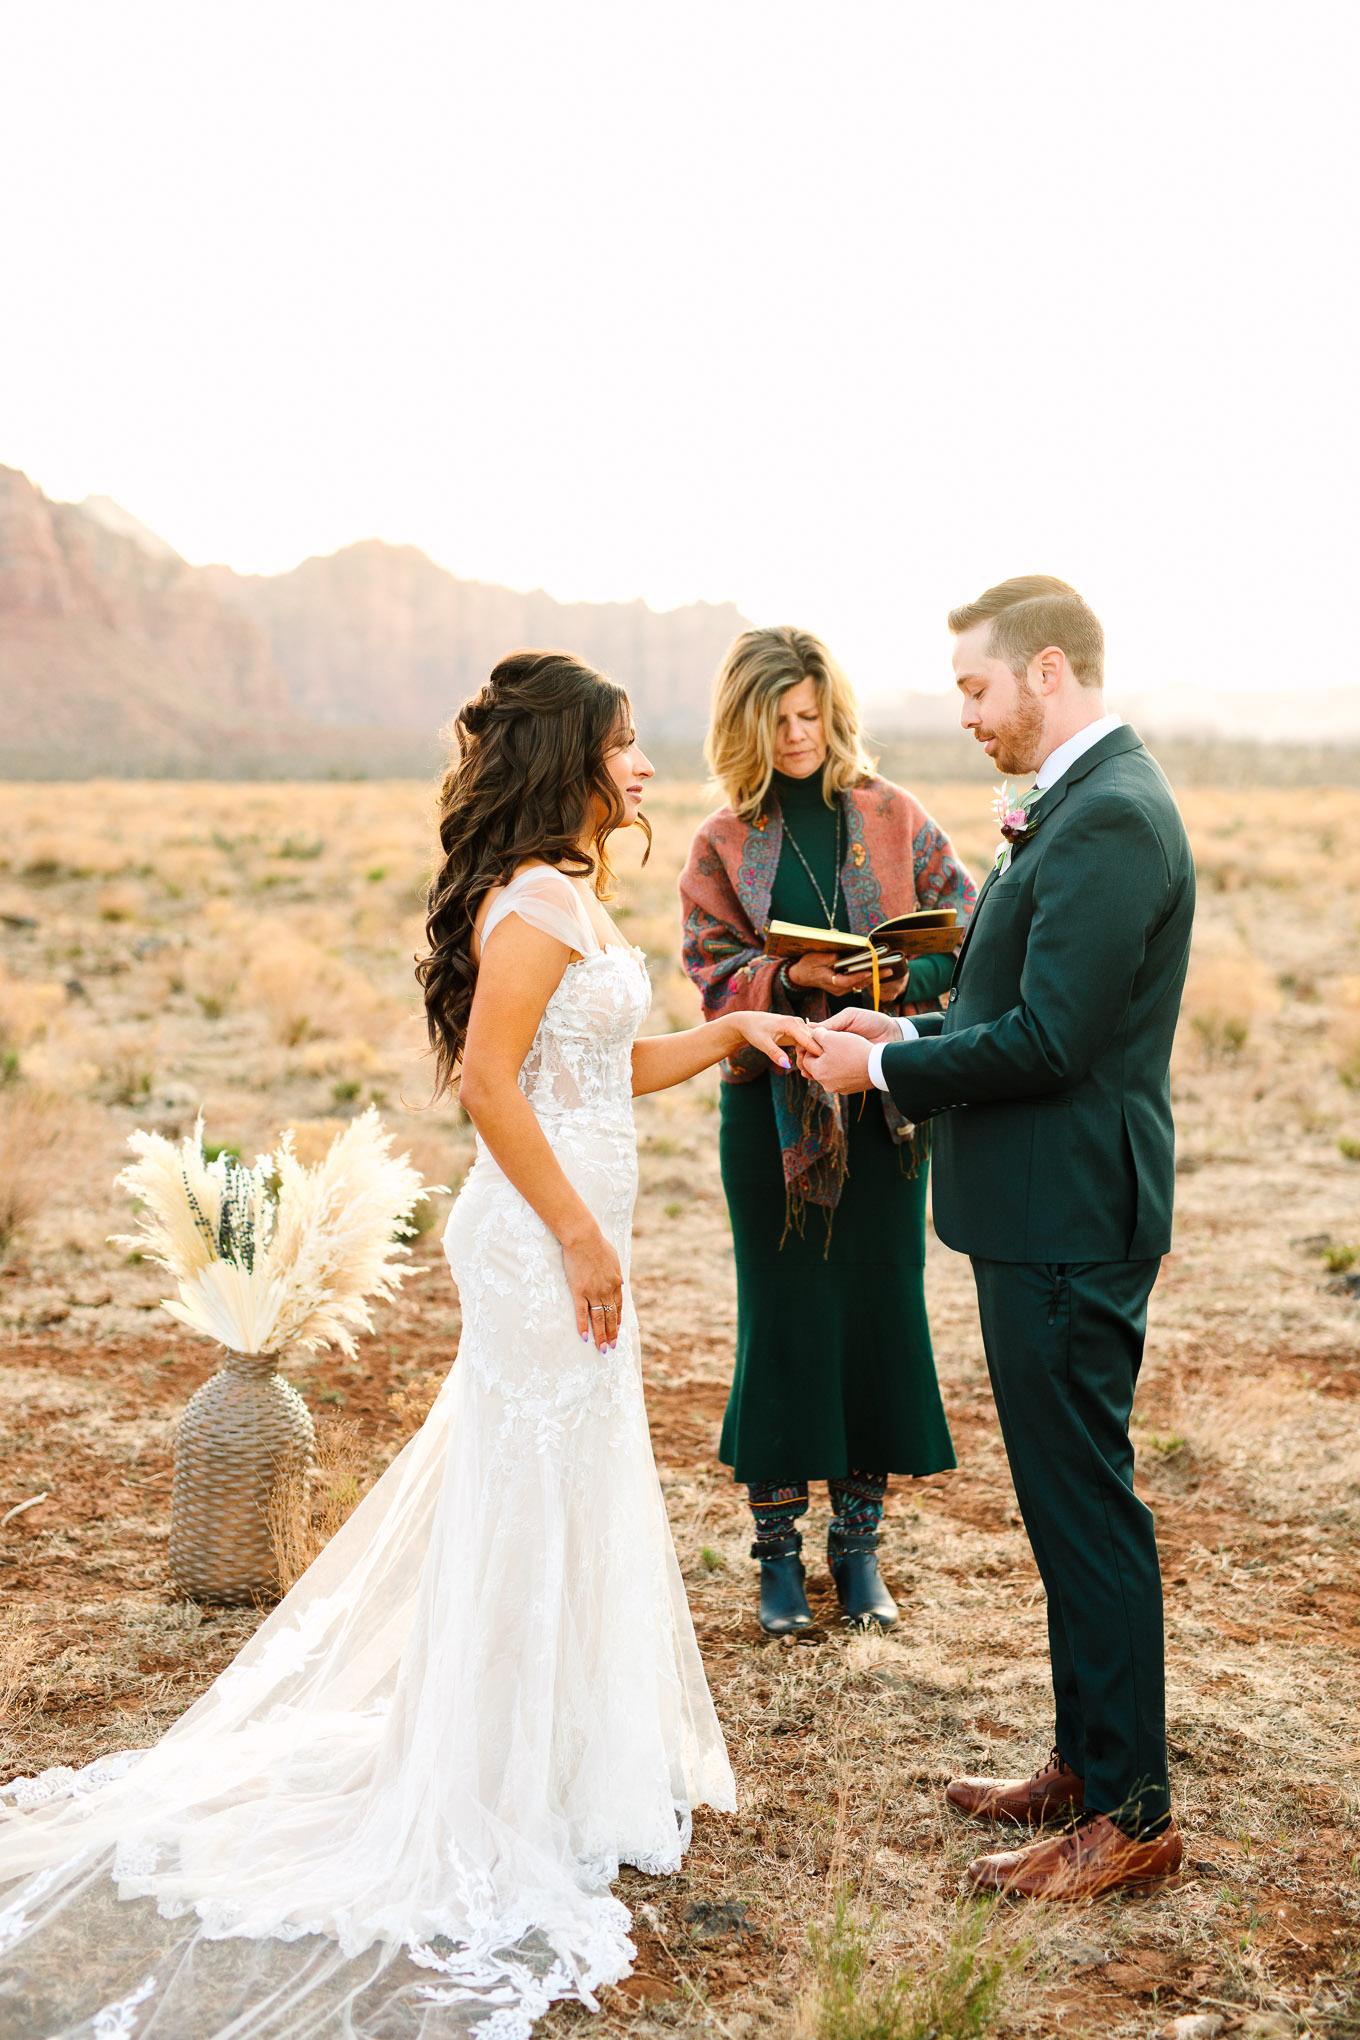 Bride and groom wedding ring exchange | Zion Under Canvas camping elopement at sunrise | Colorful elopement photography | #utahelopement #zionelopement #zionwedding #undercanvaszion #sunriseelopement #adventureelopement  Source: Mary Costa Photography | Los Angeles